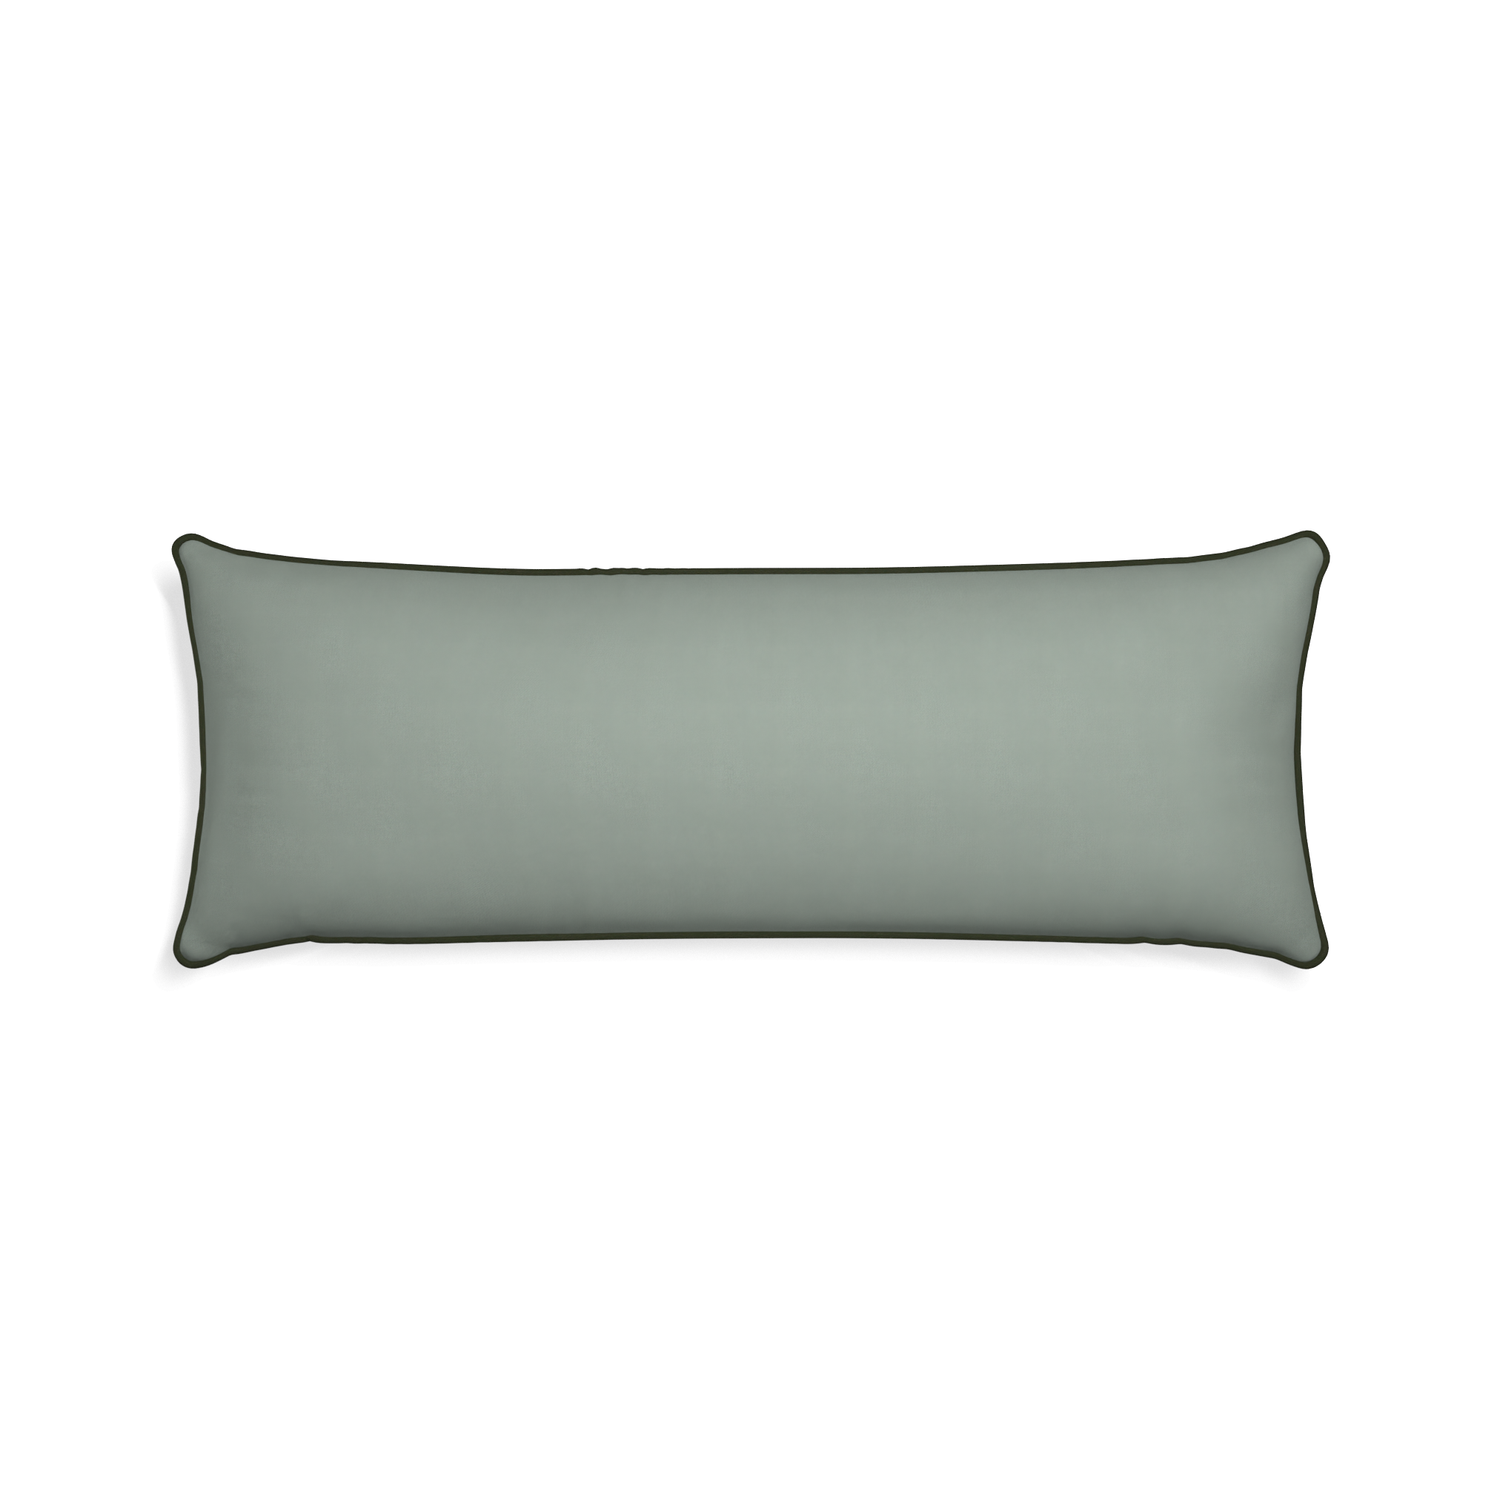 Xl-lumbar sage custom sage green cottonpillow with f piping on white background